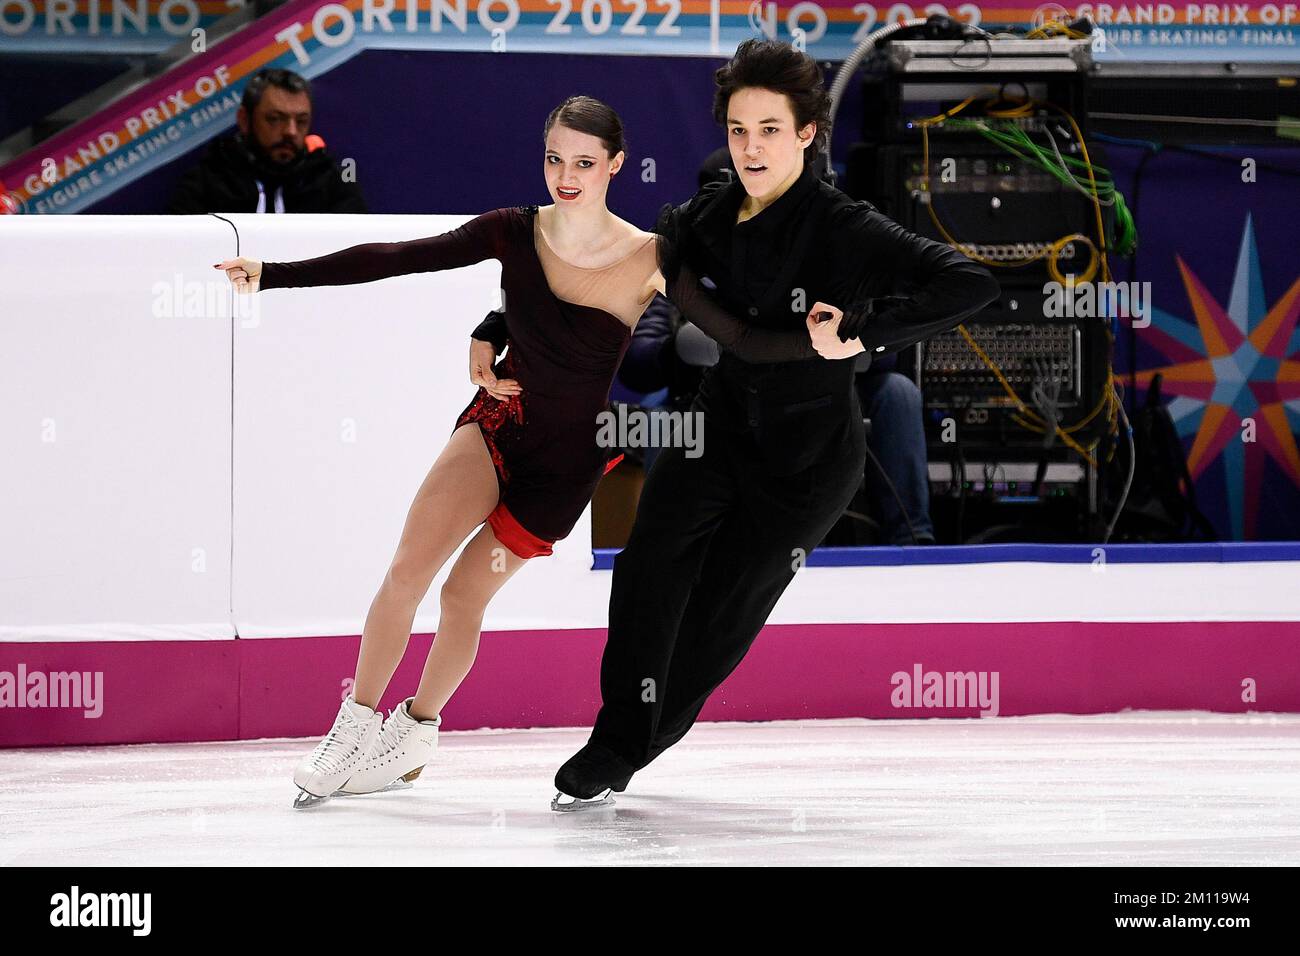 Turin, Italy. 09 December 2022. Darya Grimm and Michail Savitskiy of Germany compete in the Junior Ice Dance Rhythm Dance during day two of the ISU Grand Prix of Figure Skating Final. Credit: Nicolò Campo/Alamy Live News Stock Photo